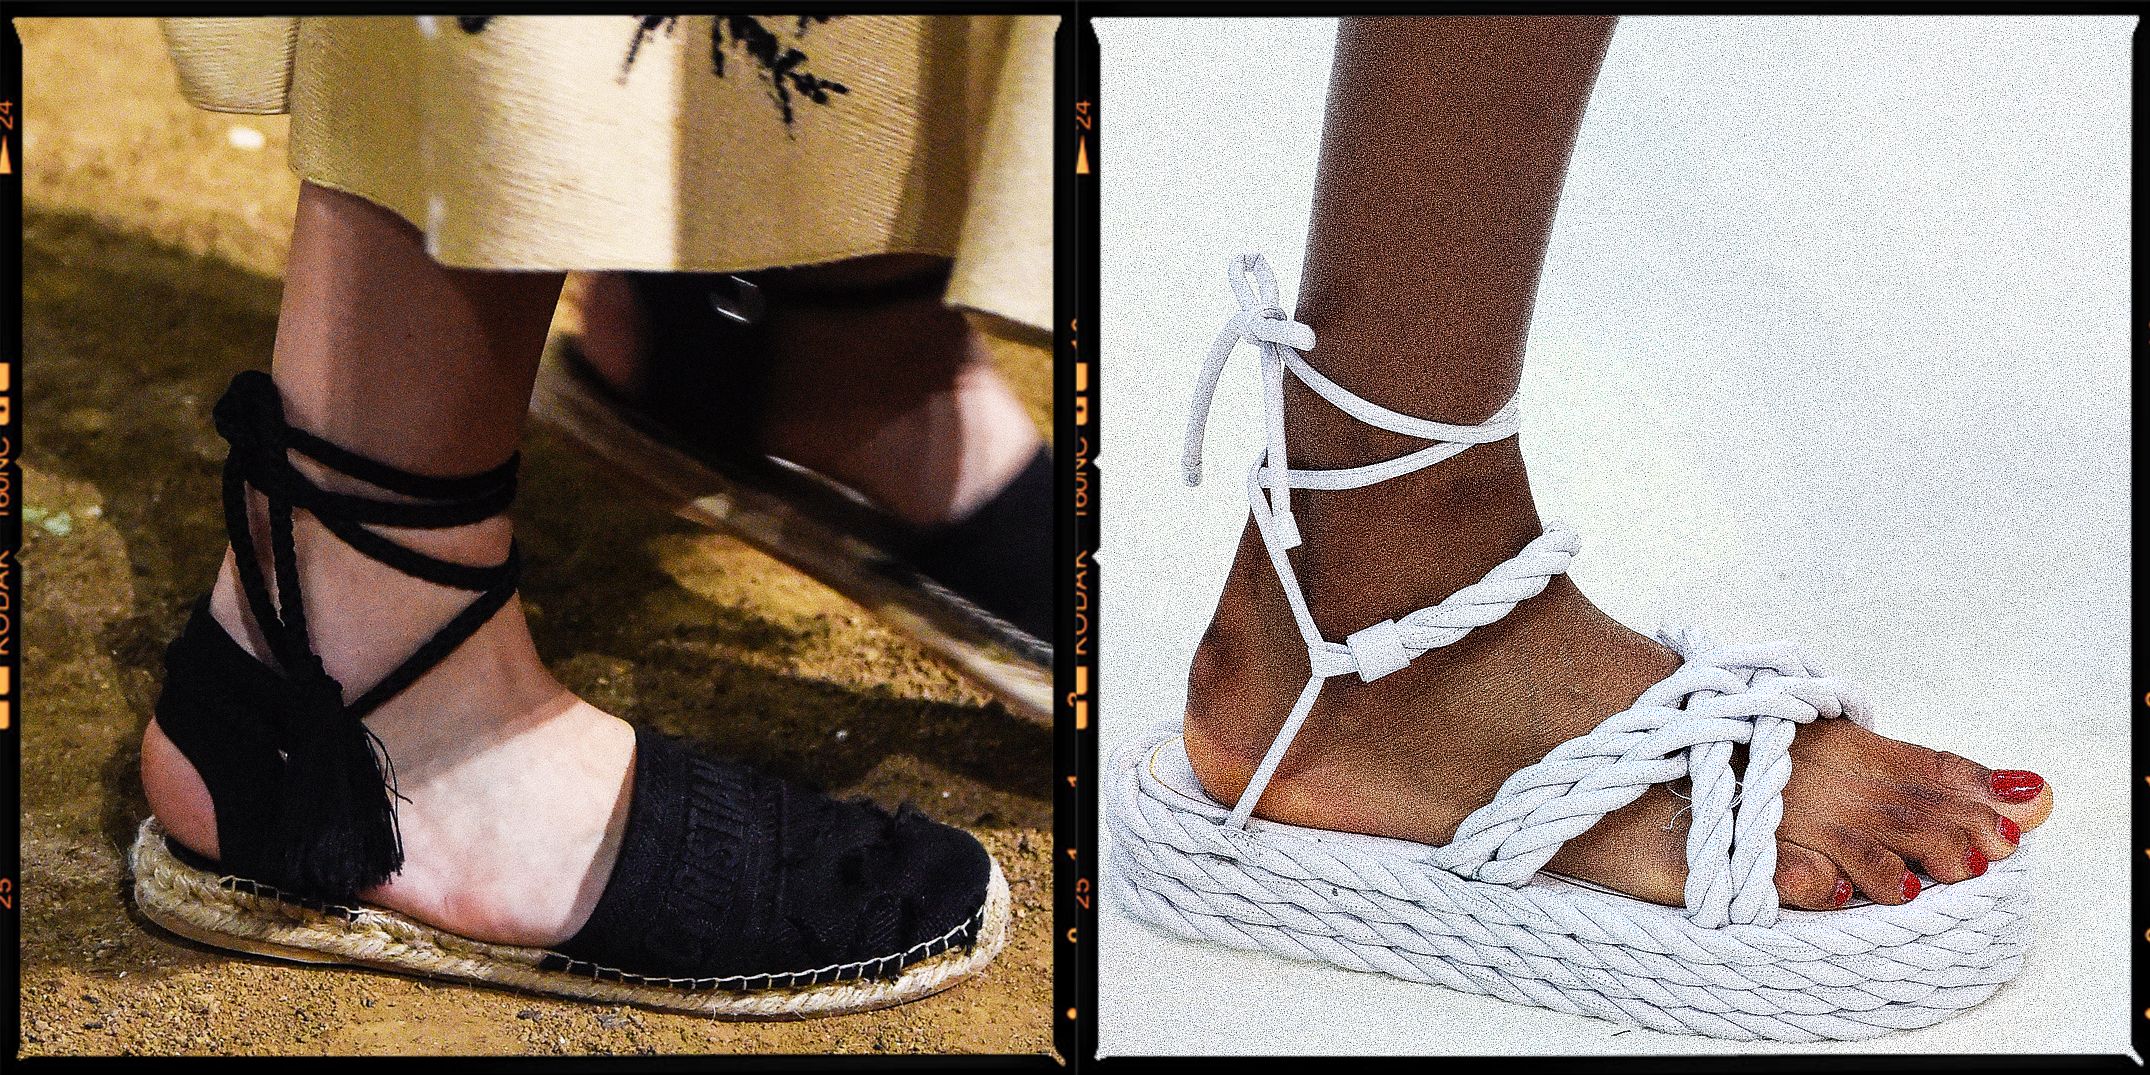 Must-have espadrilles for the summer